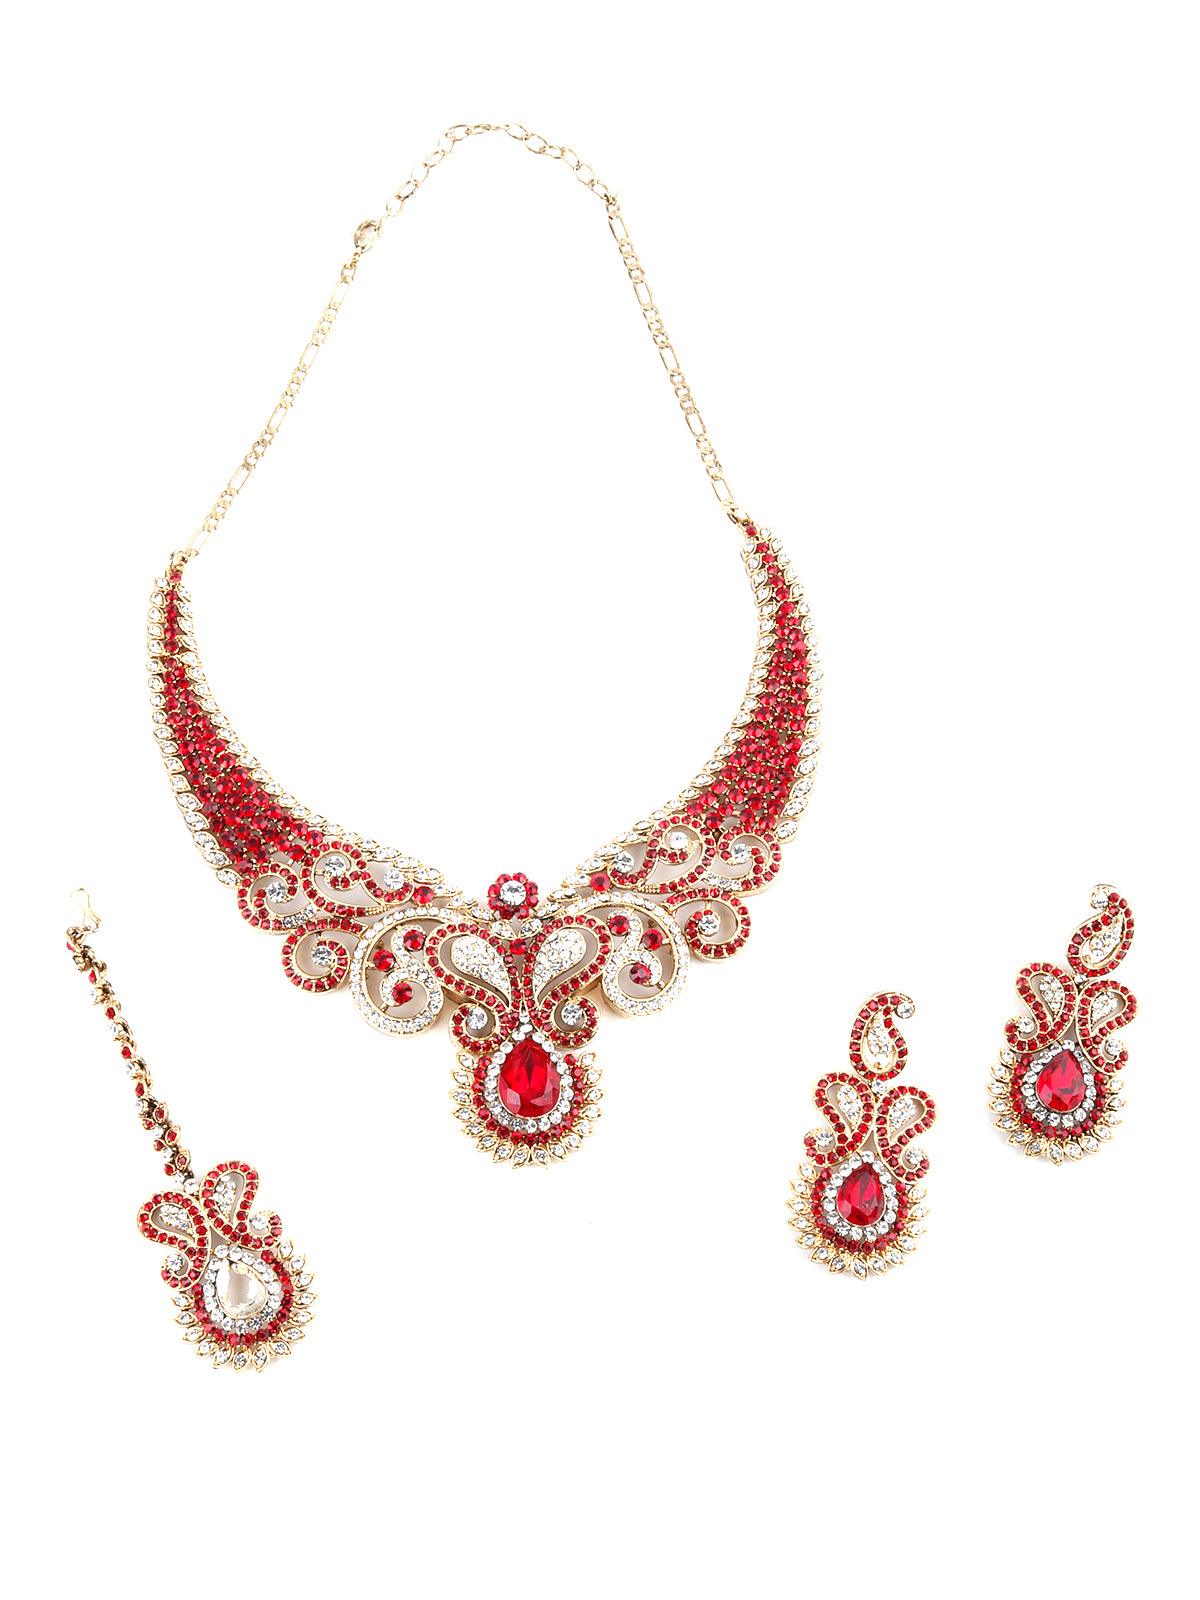 Paisley Red And White Embellished Necklace Set - Odette